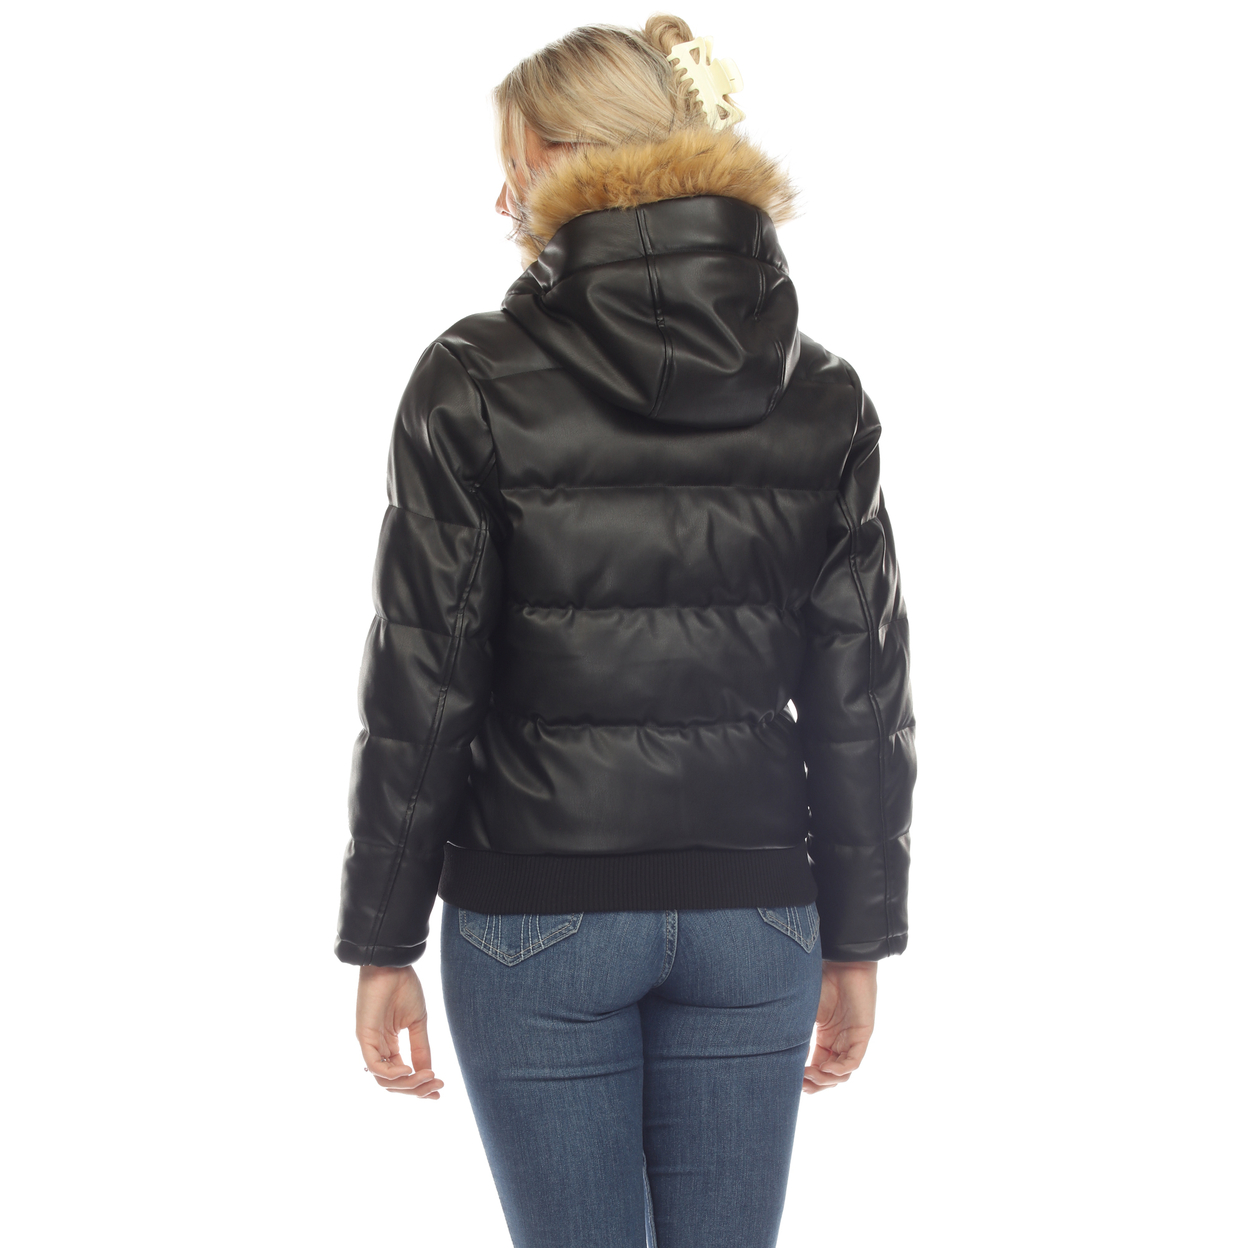 White Mark Women's Removable Fur Hoodie PU Leather Puffer Jacket - Black, Small